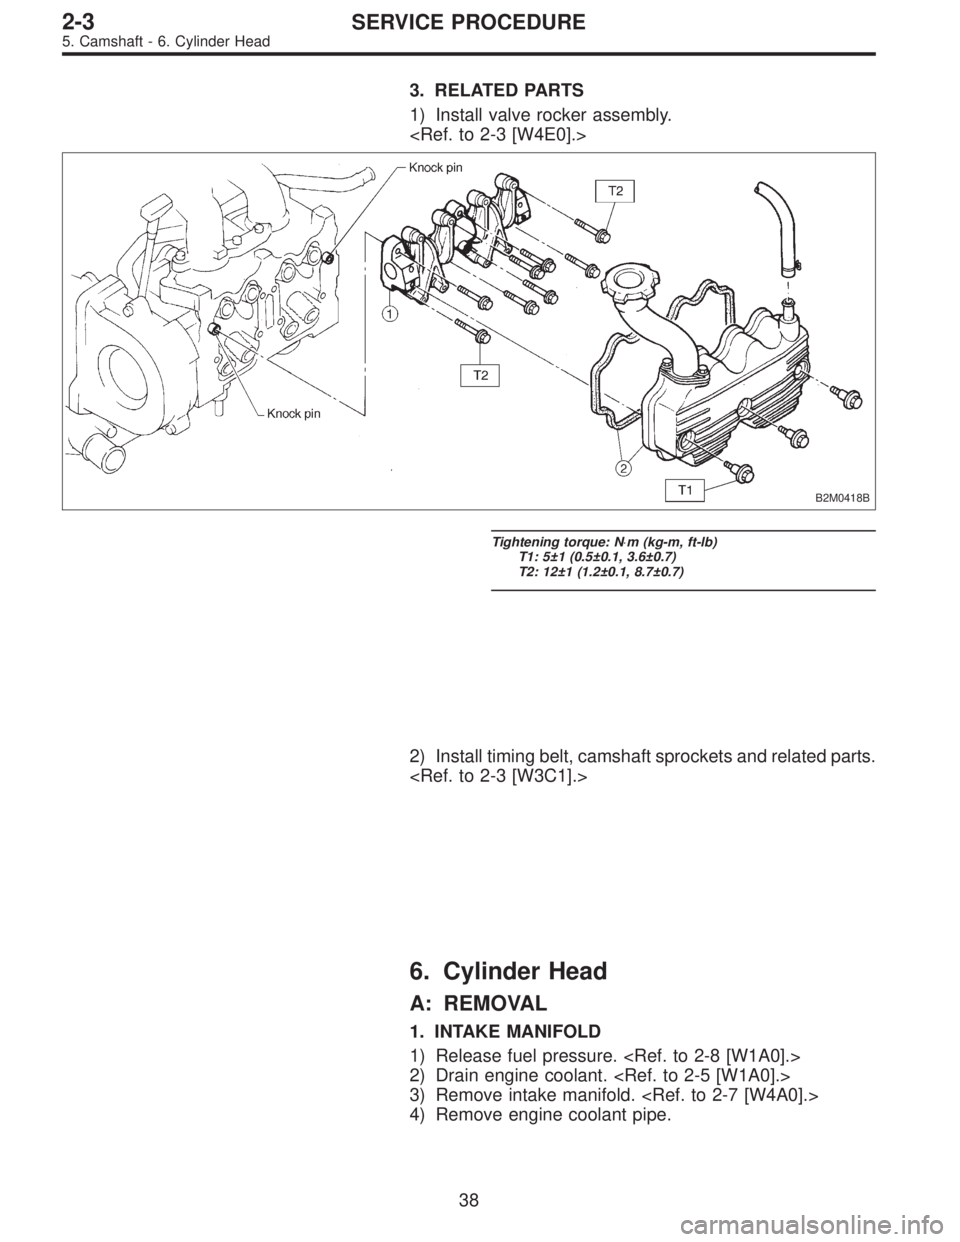 SUBARU LEGACY 1995  Service Repair Manual 3. RELATED PARTS
1) Install valve rocker assembly.
<Ref. to 2-3 [W4E0].>
B2M0418B
Tightening torque: N⋅m (kg-m, ft-lb)
T1: 5±1 (0.5±0.1, 3.6±0.7)
T2: 12±1 (1.2±0.1, 8.7±0.7)
2) Install timing 